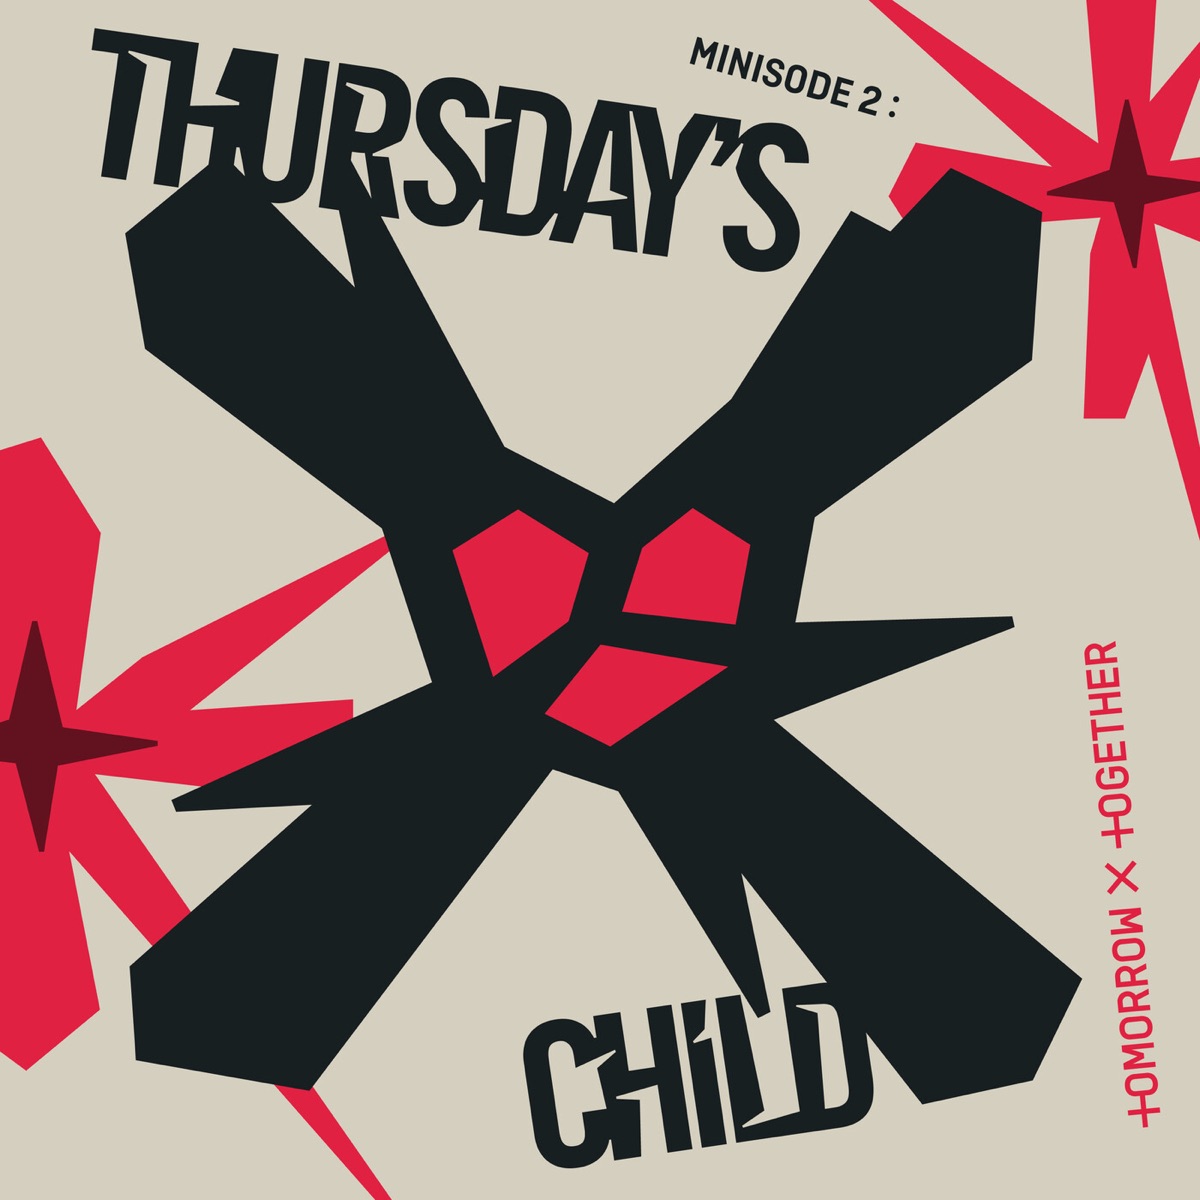 TOMORROW X TOGETHER - minisode 2: Thursday's Child - EP